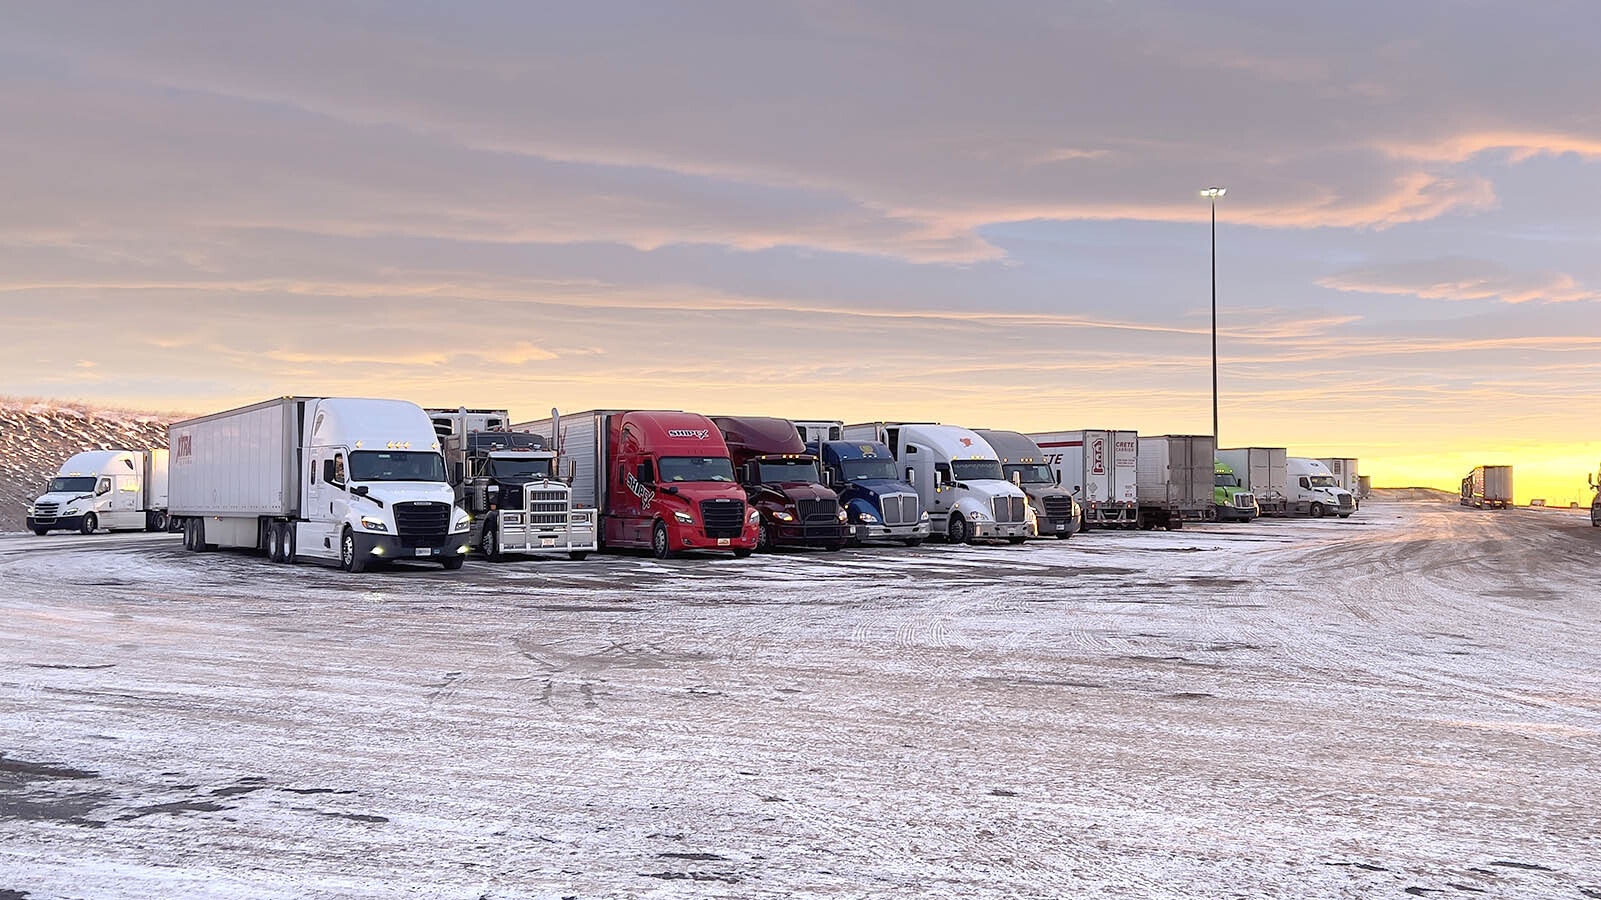 Dozens of trucks park in a lot off Interstate 80 to wait out last weekend's polar vortex freeze that shut down much of Wyoming with temperatures hitting minus 30 and below in some places.